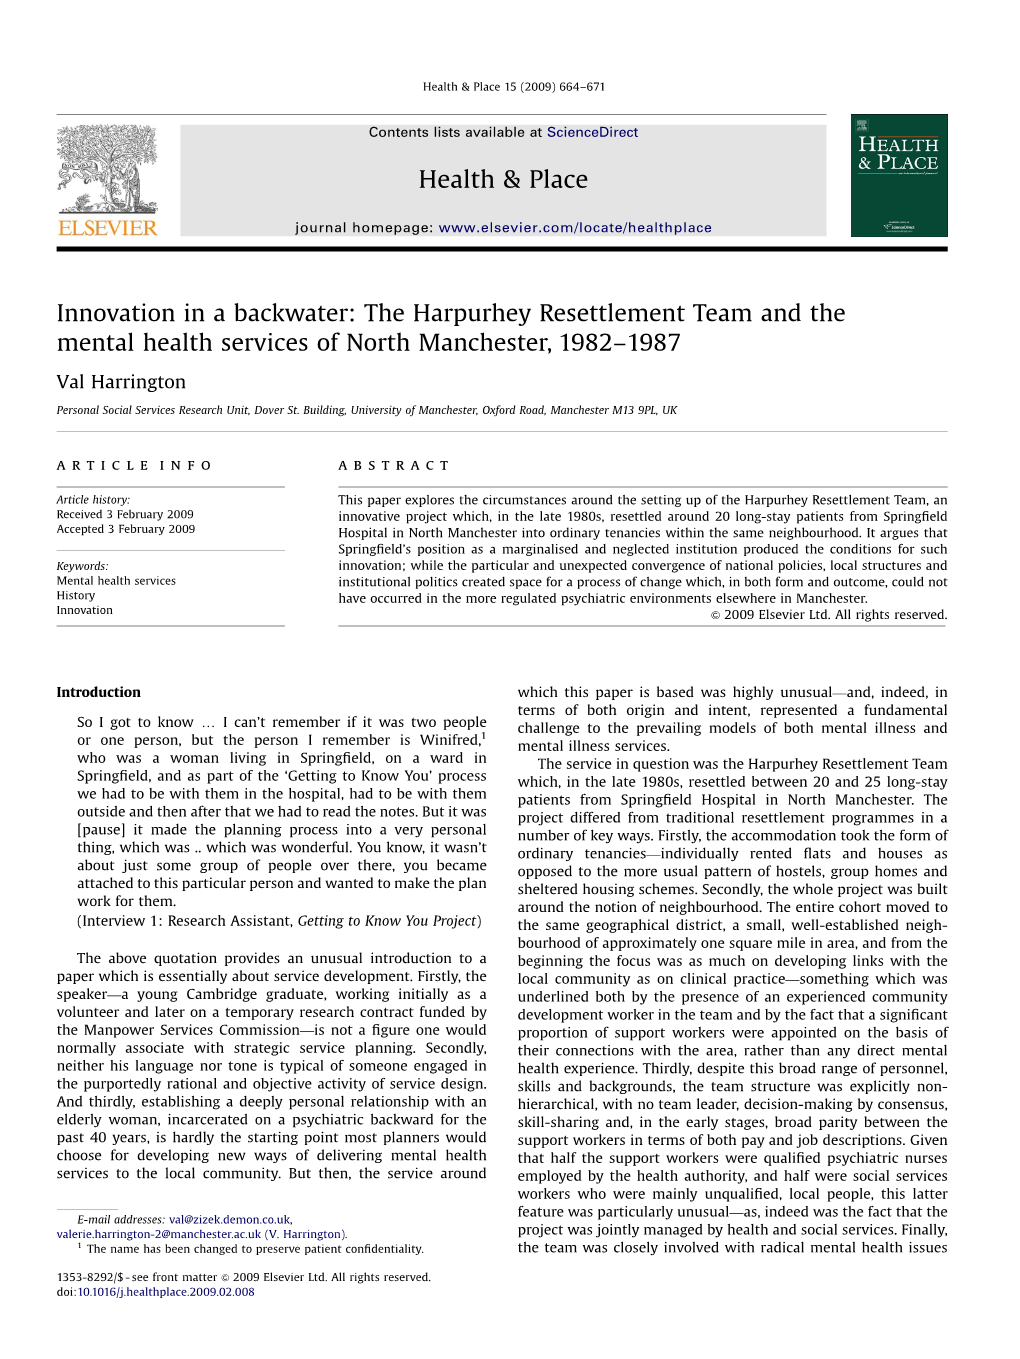 Innovation in a Backwater: the Harpurhey Resettlement Team and the Mental Health Services of North Manchester, 1982–1987